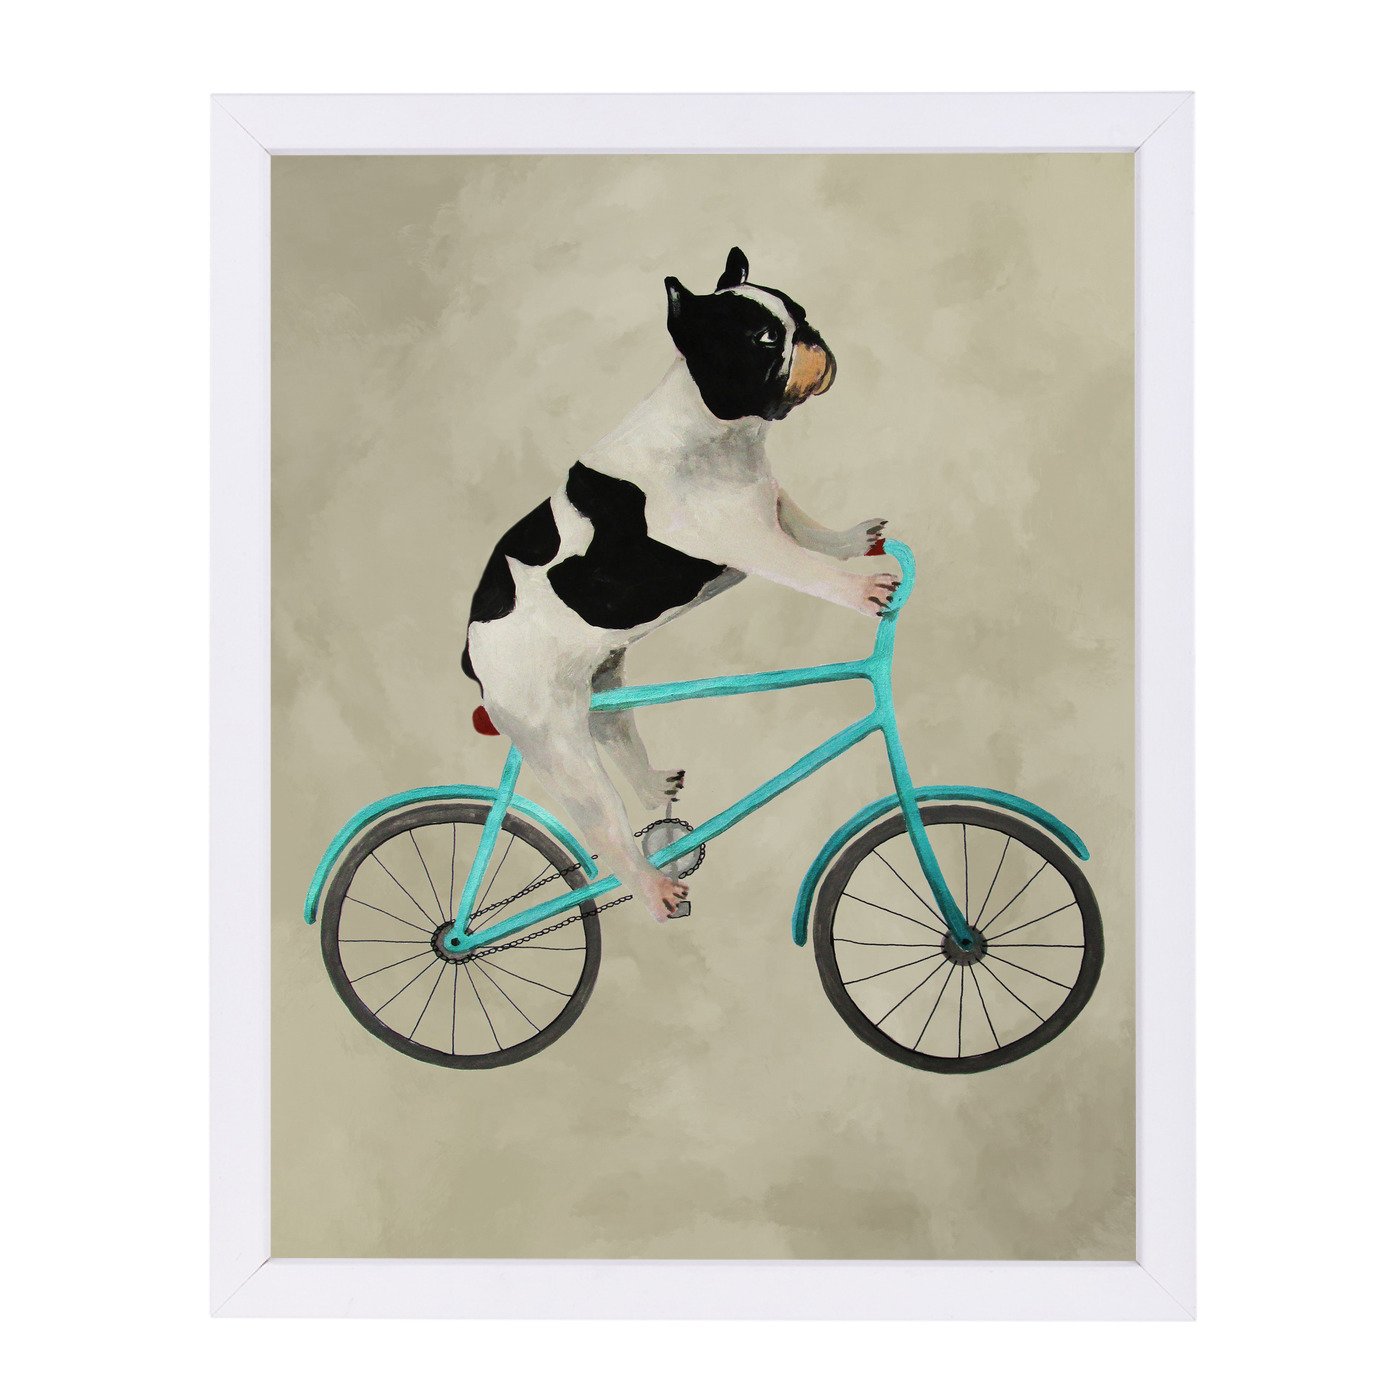 French Bulldog On Bicycle By Coco De Paris - Framed Print - Americanflat